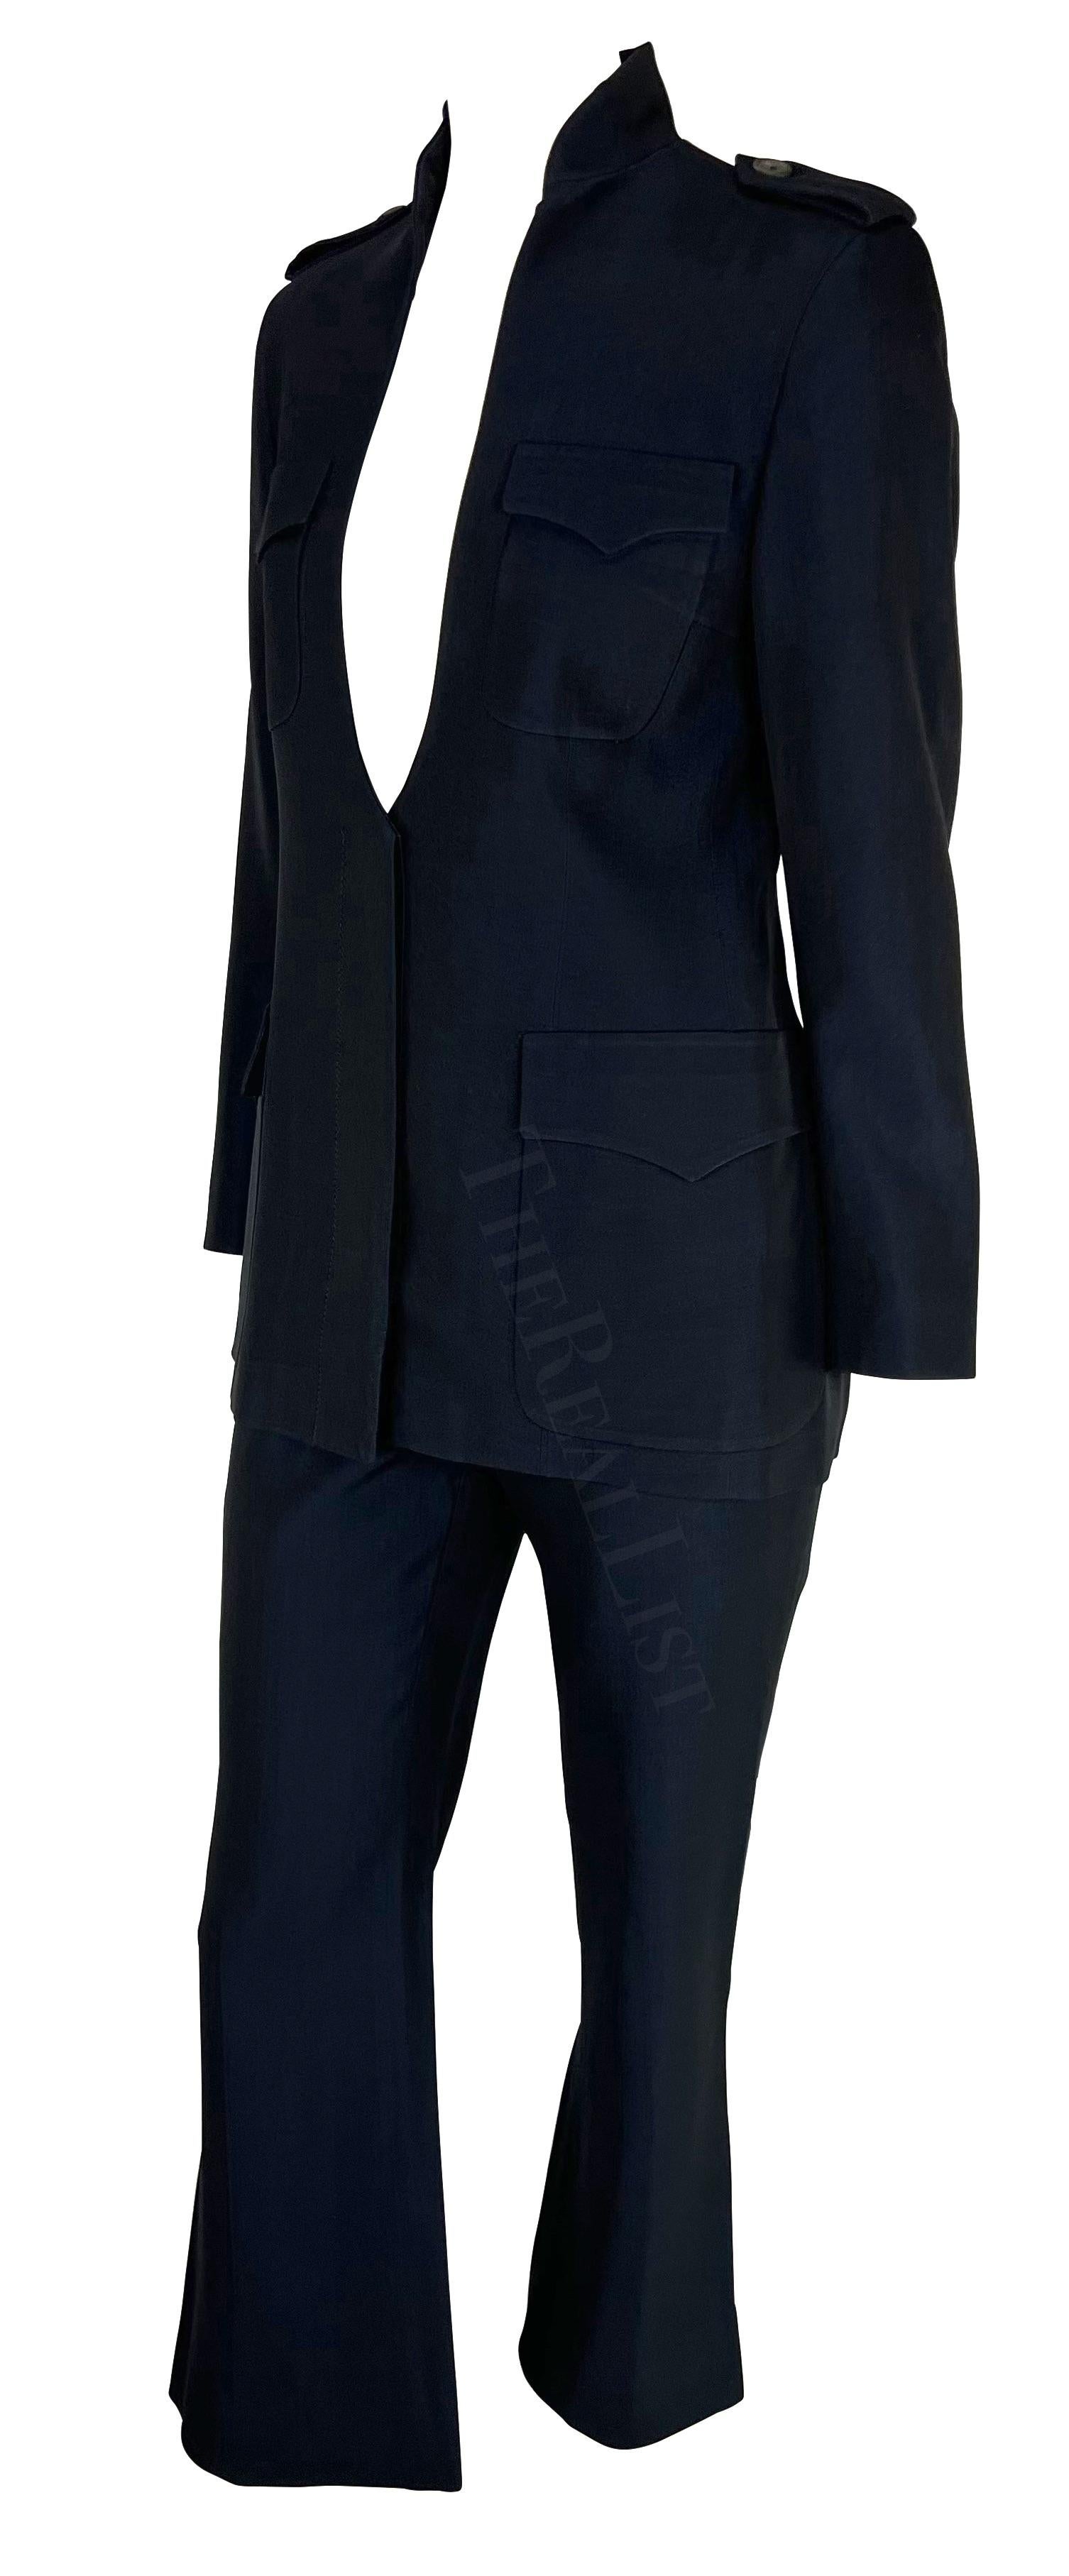 Women's or Men's F/W 1996 Gucci by Tom Ford Runway Plunging Iridescent Navy Pantsuit For Sale